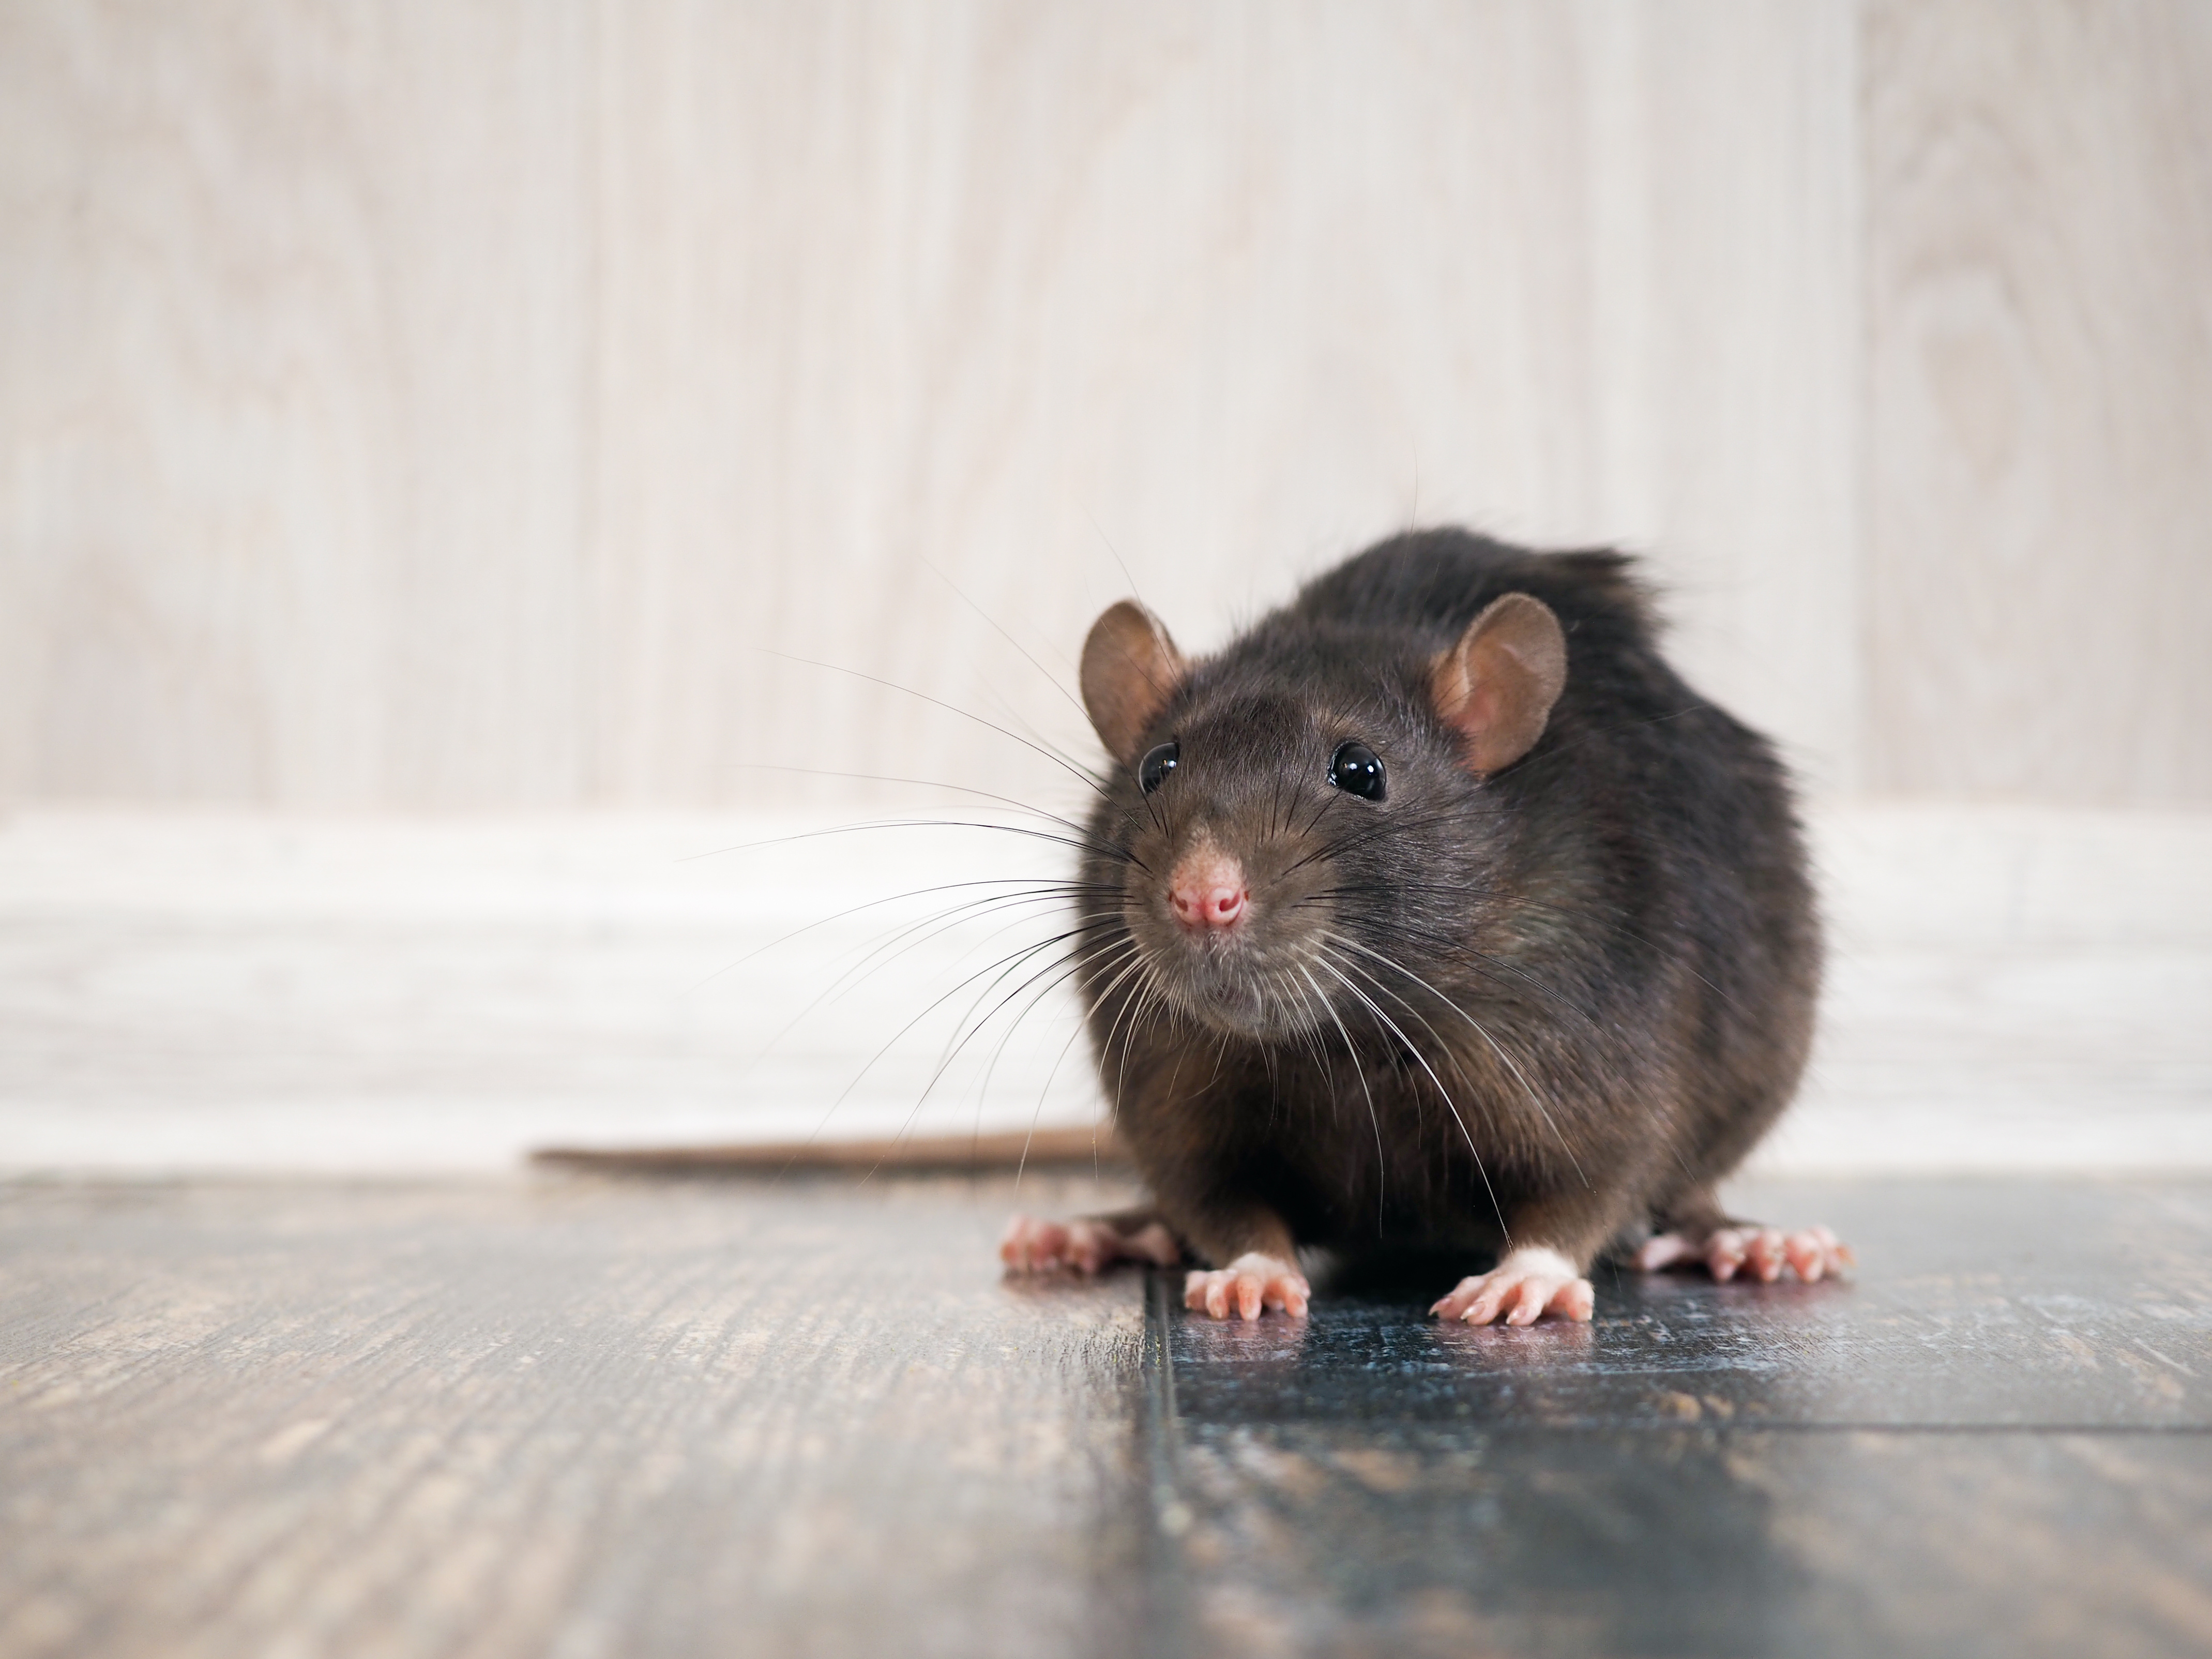 Rodent Control South Shore Massachusetts: The Importance of Rat